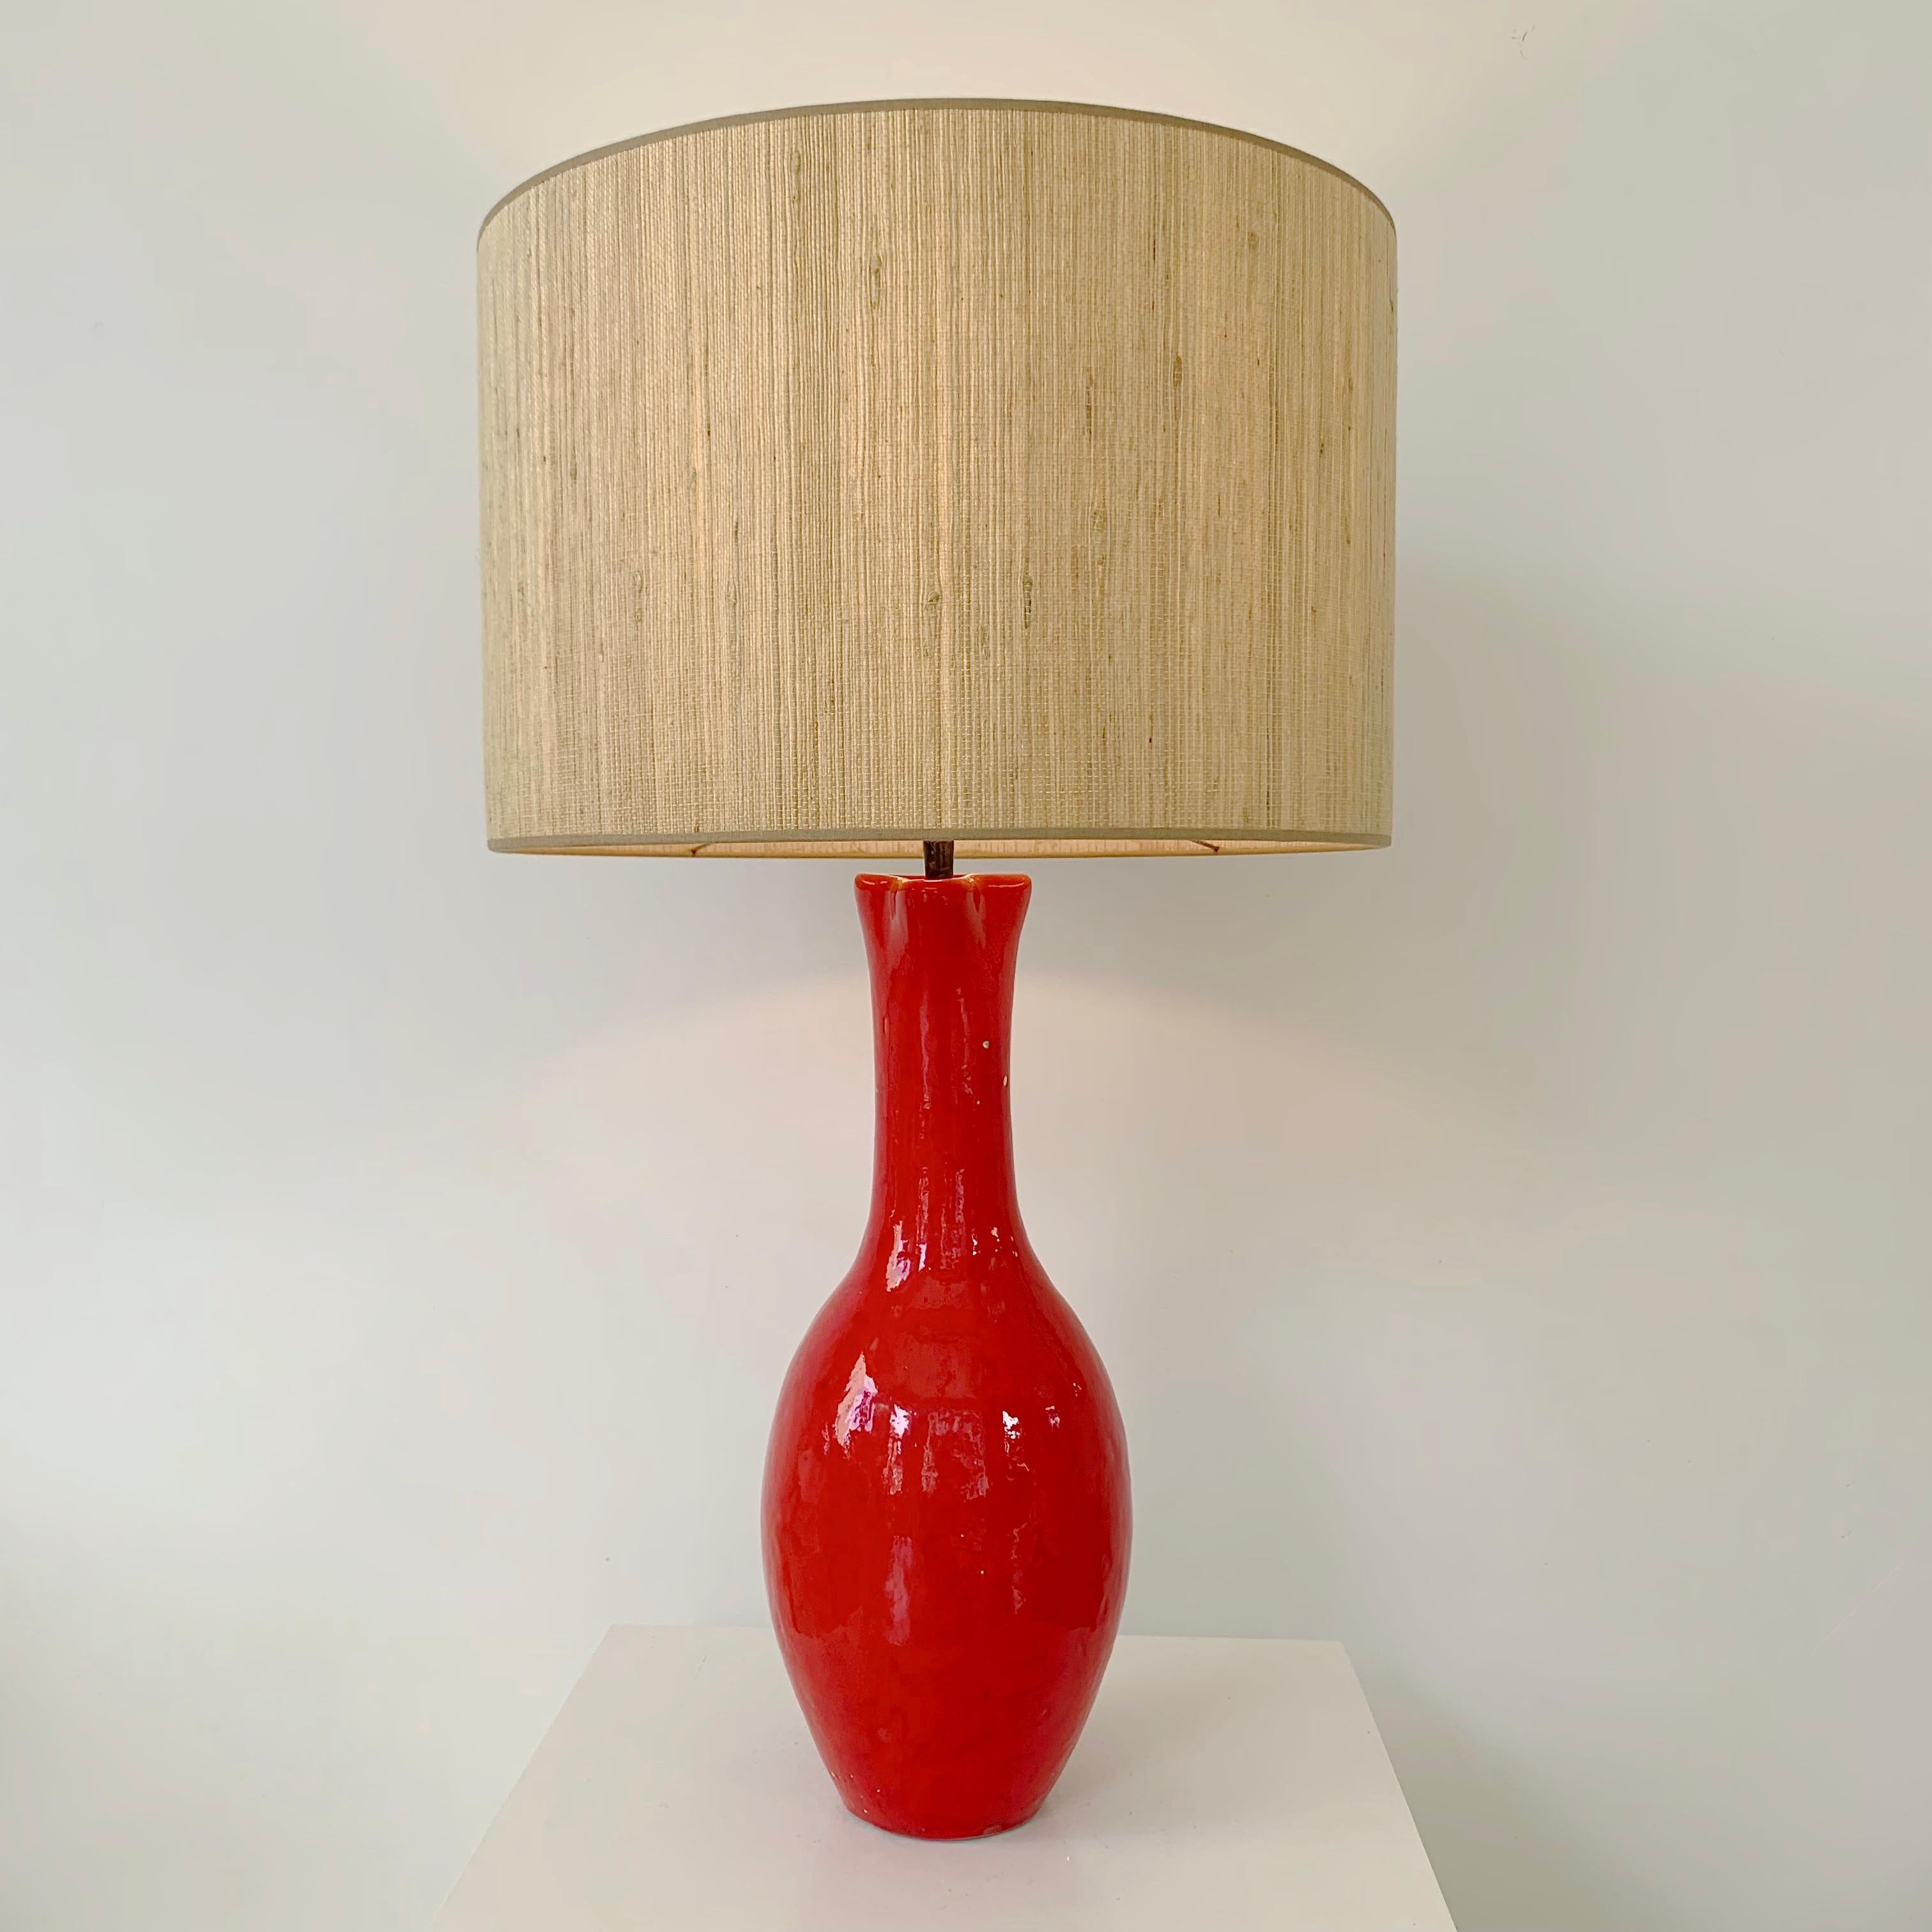 Mid-20th Century Les Archanges/Gilbert Valentin Large Signed Table Lamp, 1950s, Vallauris.